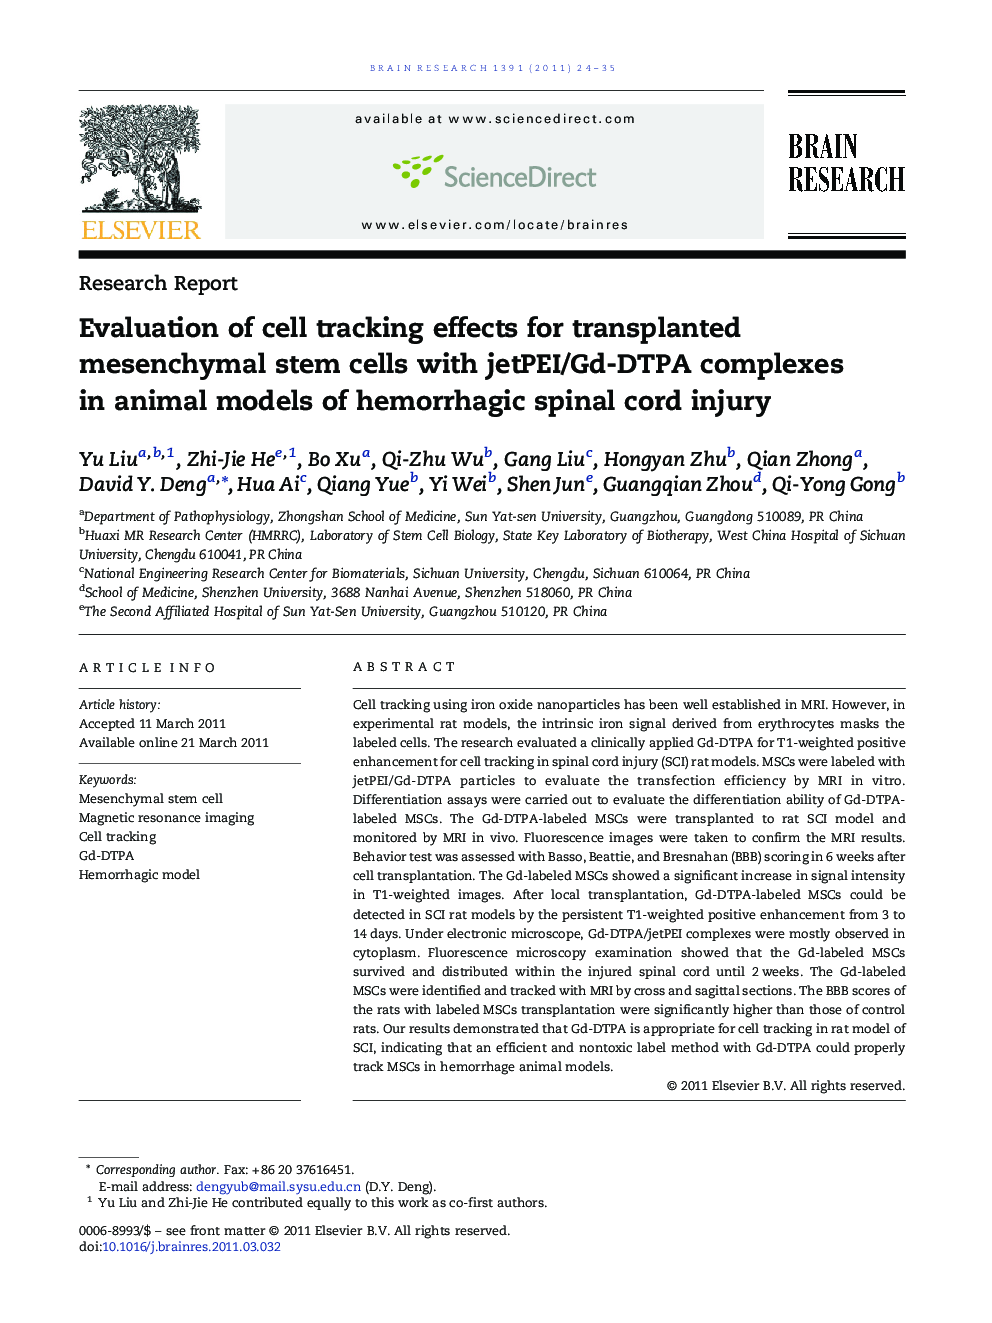 Evaluation of cell tracking effects for transplanted mesenchymal stem cells with jetPEI/Gd-DTPA complexes in animal models of hemorrhagic spinal cord injury